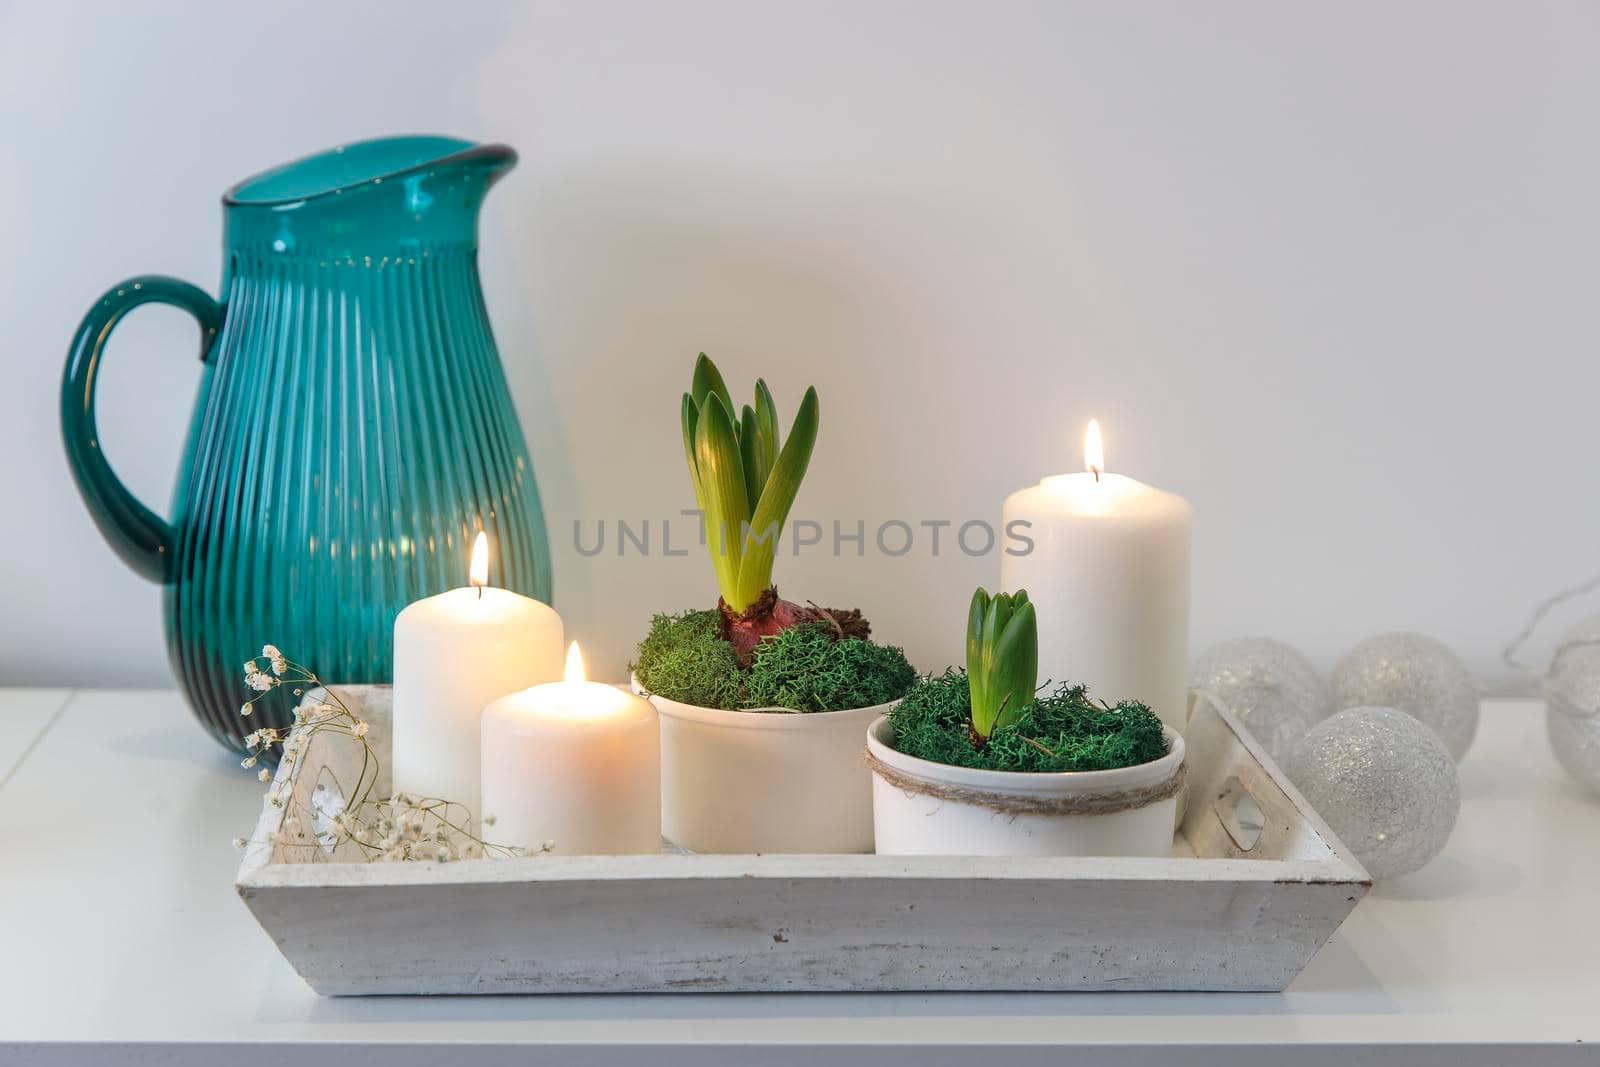 Unblown hyacinths with burning candles on a wooden vintage tray. Palm tree shadow on the wall. Home decoration for spring